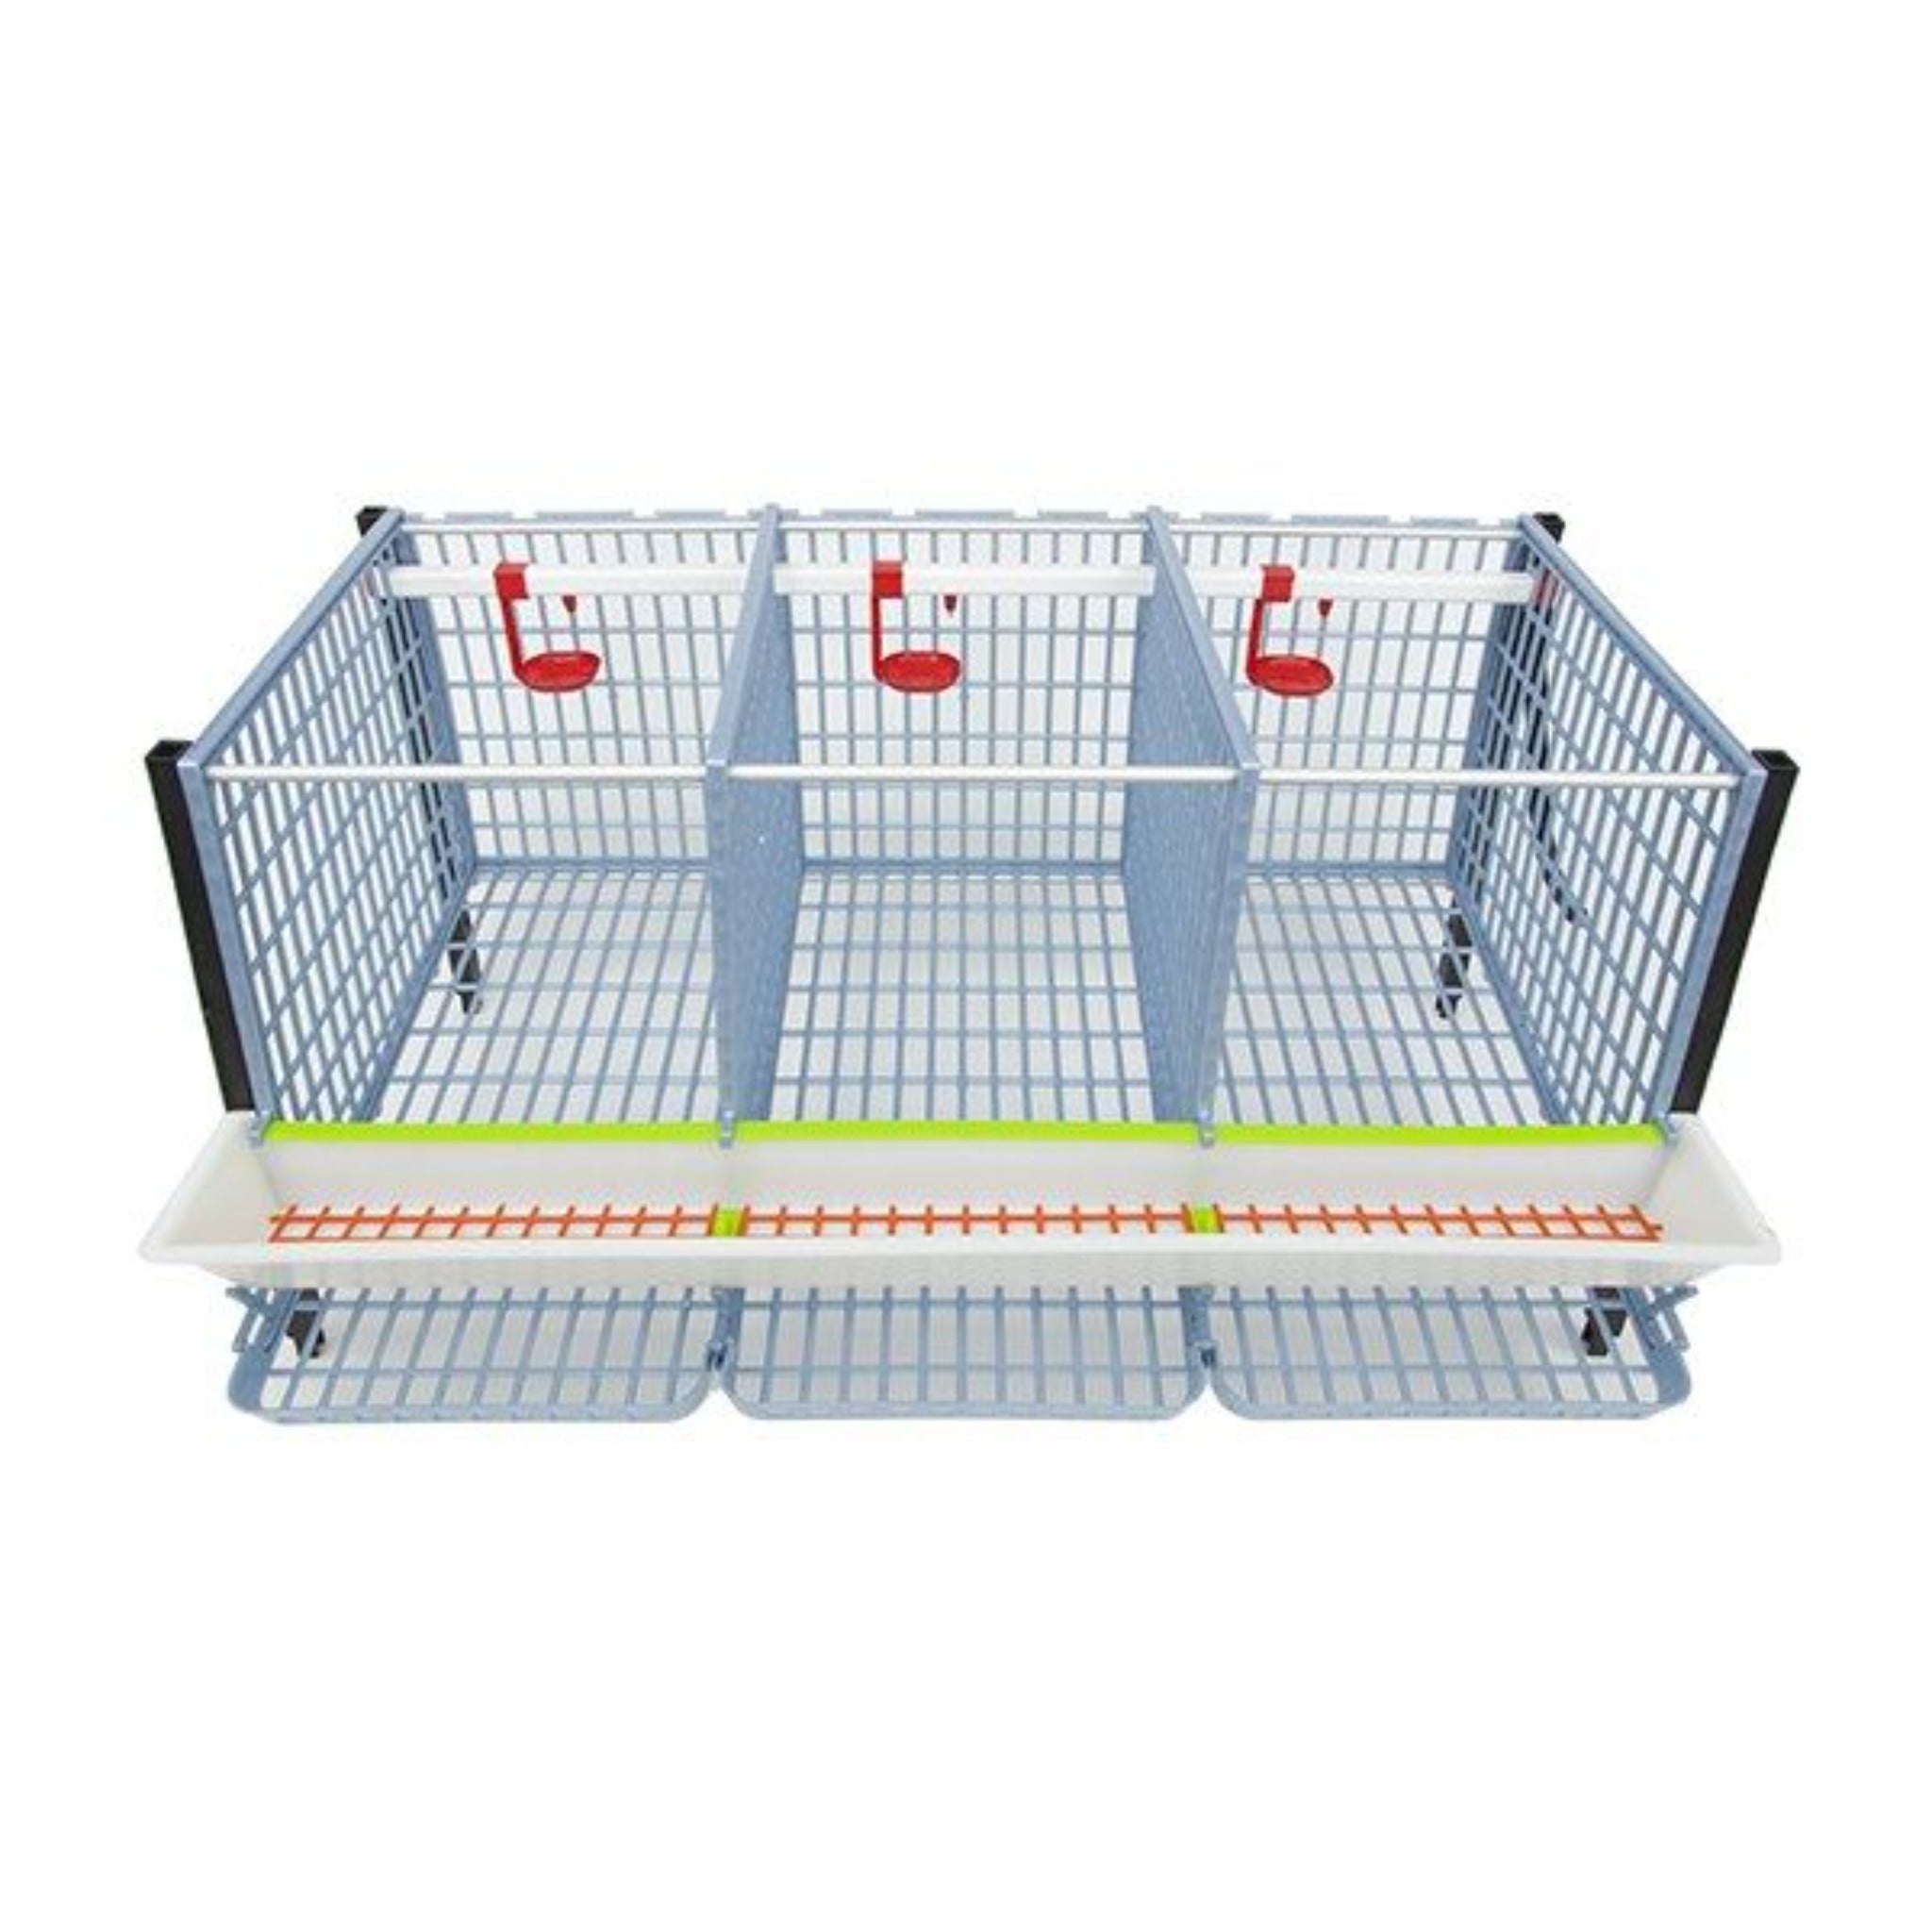 Hatching Time Cimuka. TYK40 15” Chicken cage layer addition. Image shows chicken cage from front and above. Roof and front walls are removed to show inside of cage. Roll out egg trays can be seen on front under feeding trough. Automatic drinker system is seen on back wall of cage.